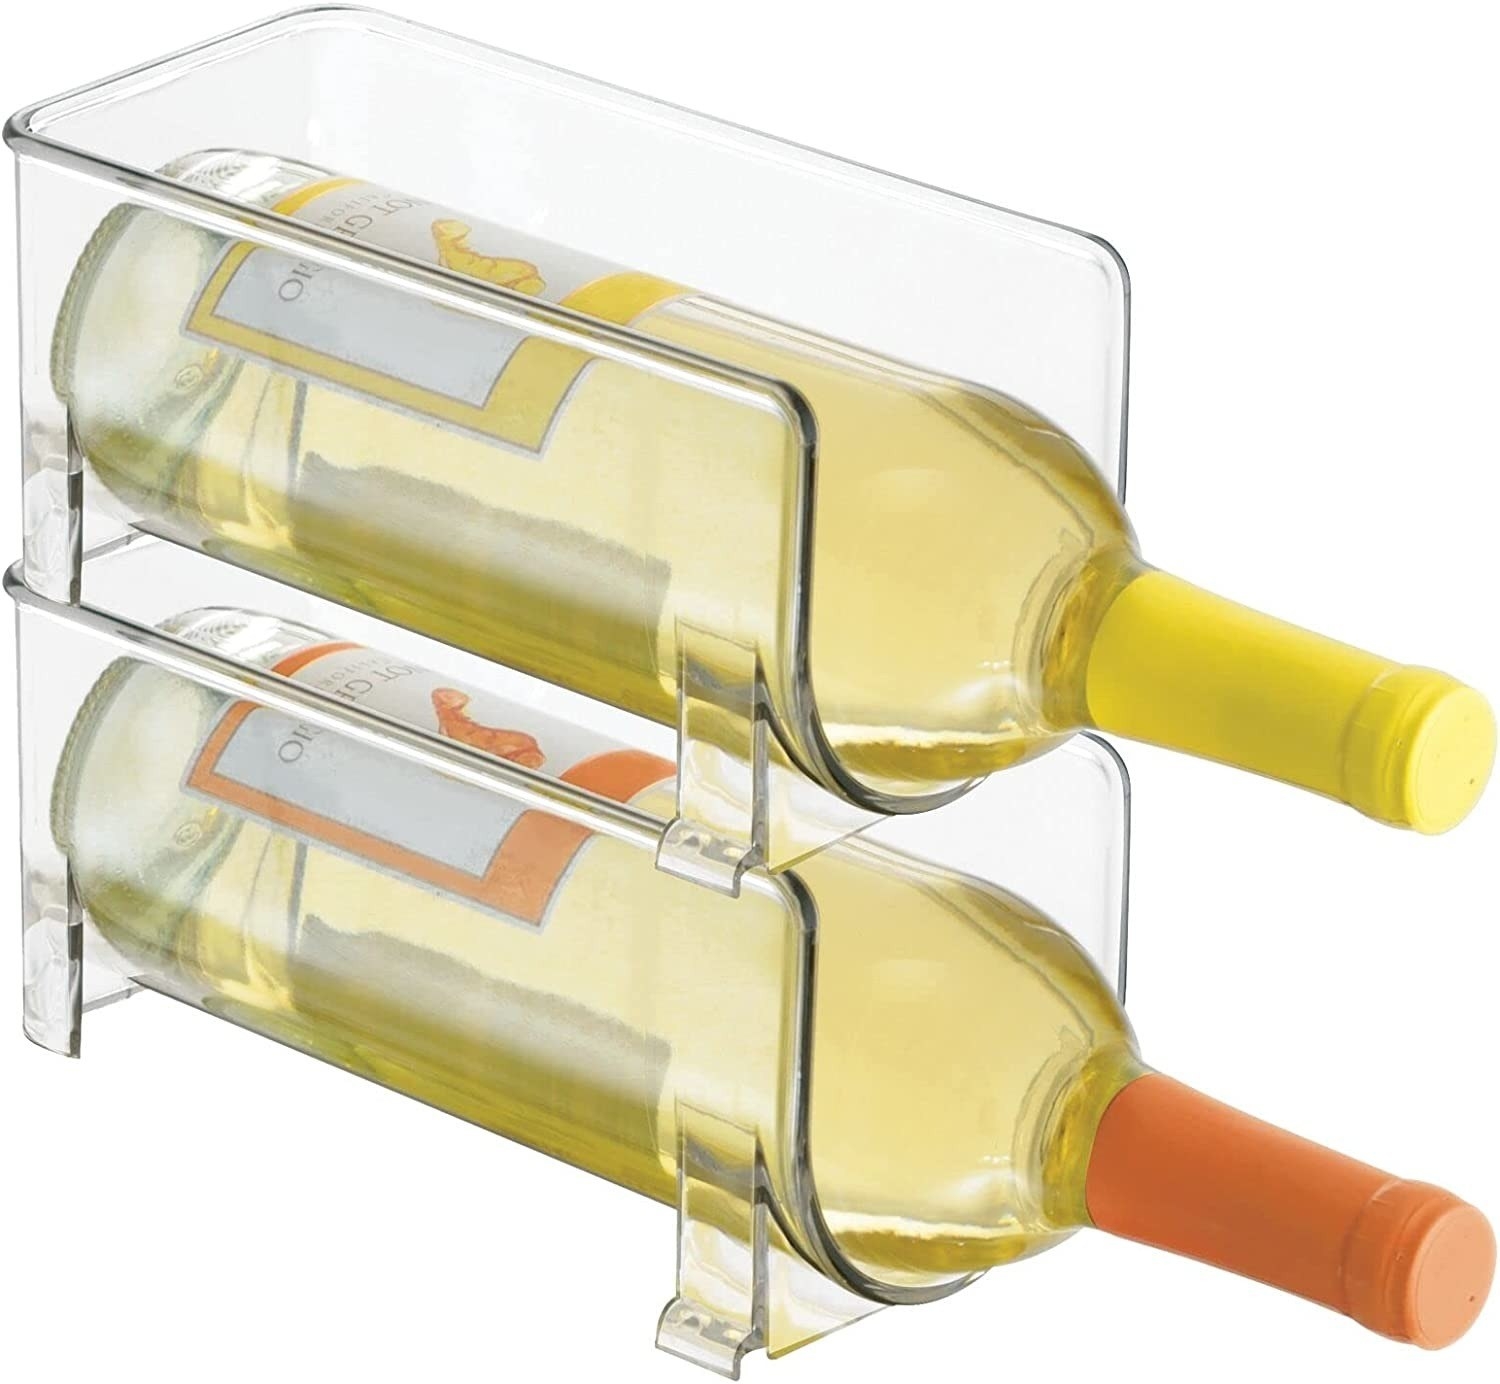 Stock image of the wine holder holding two bottles of white wine